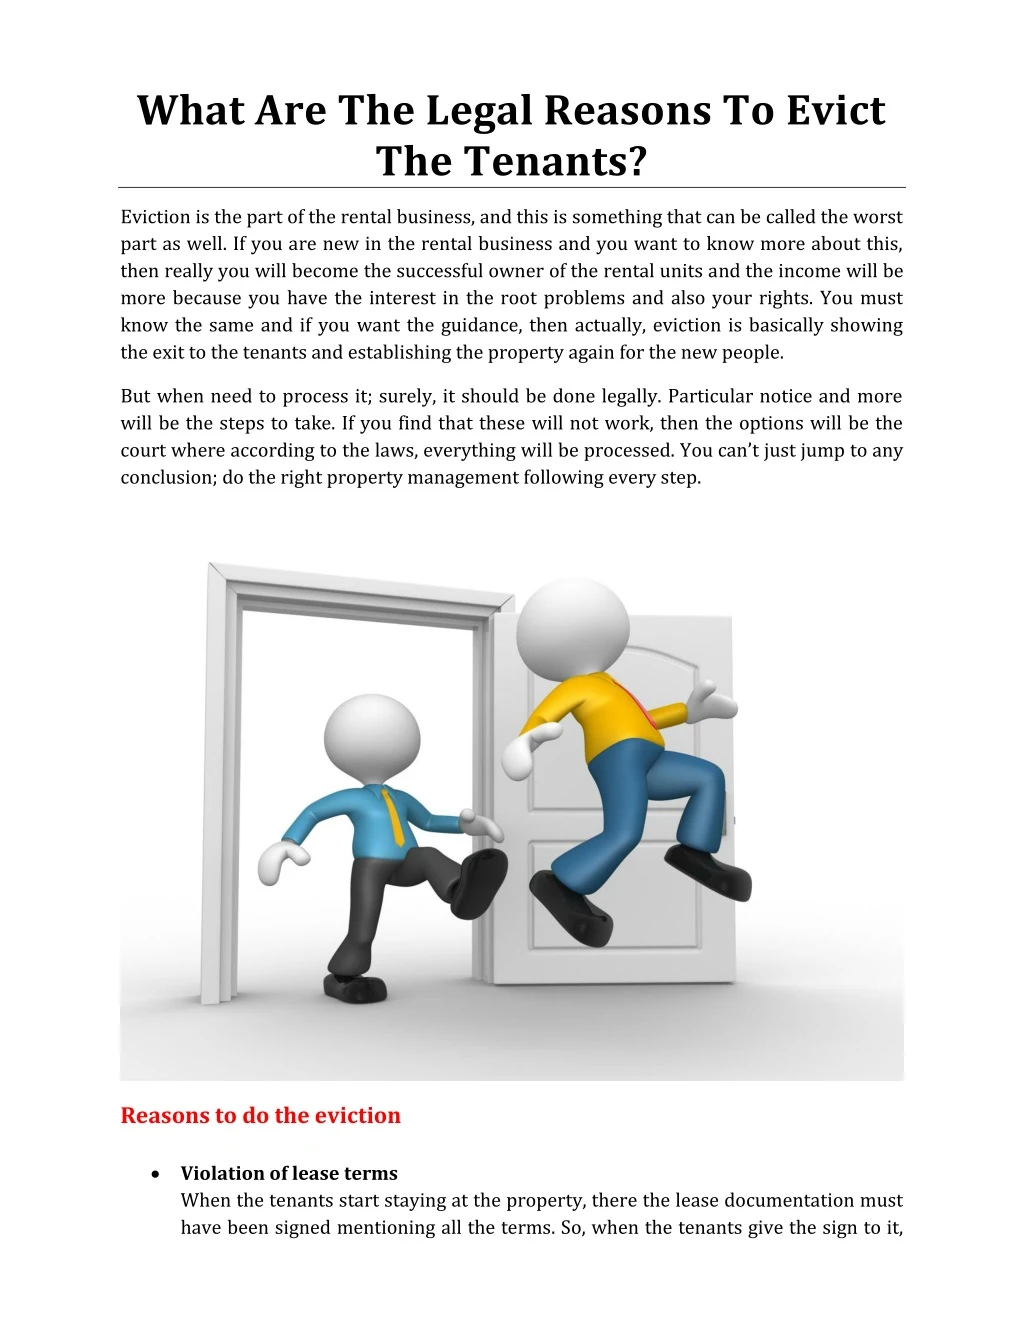 what are the legal reasons to evict the tenants